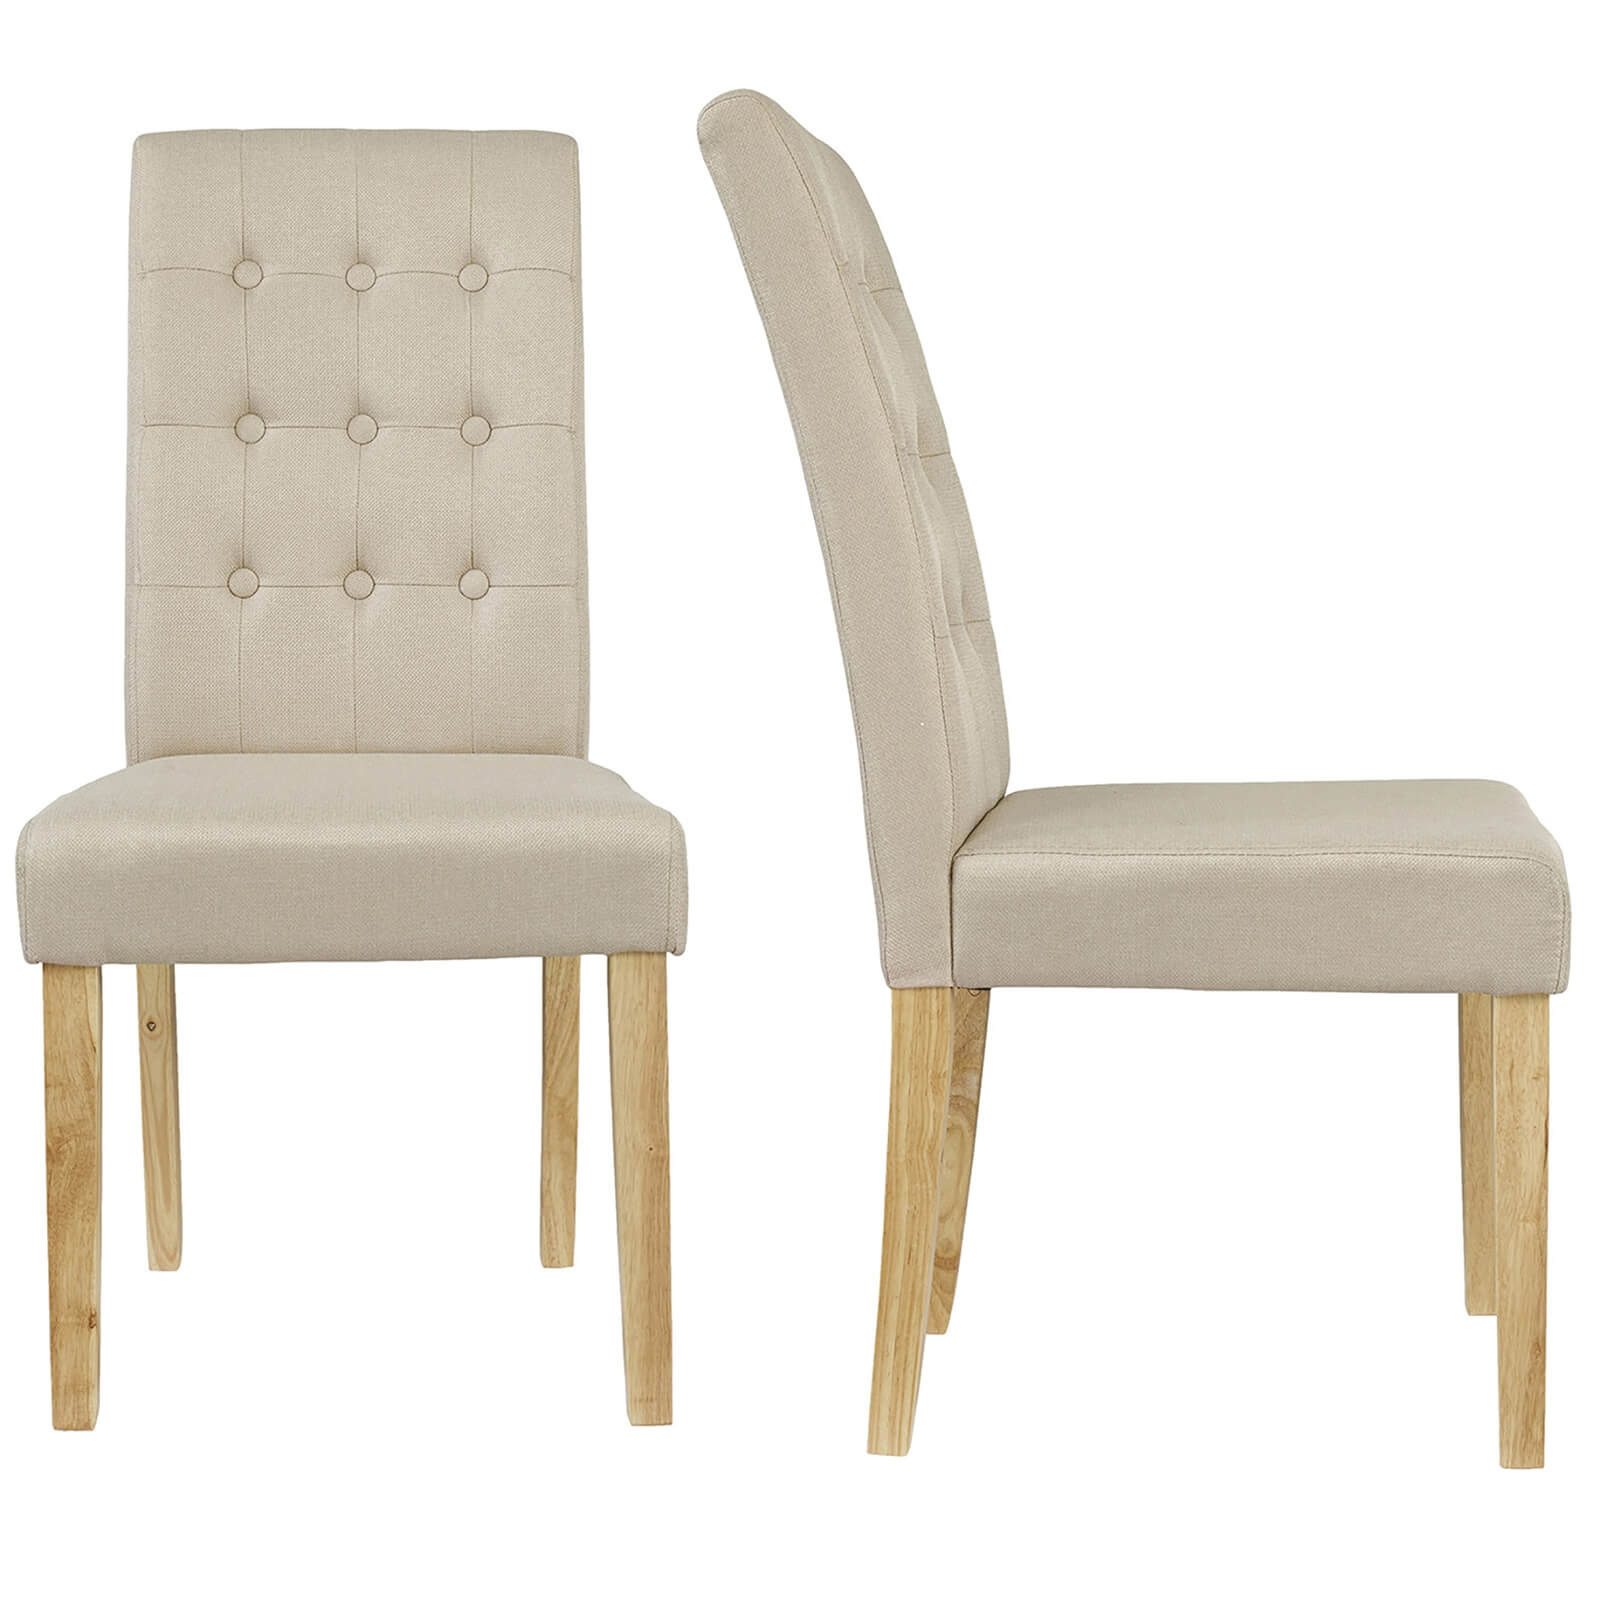 Roma Dining Chair - Beige